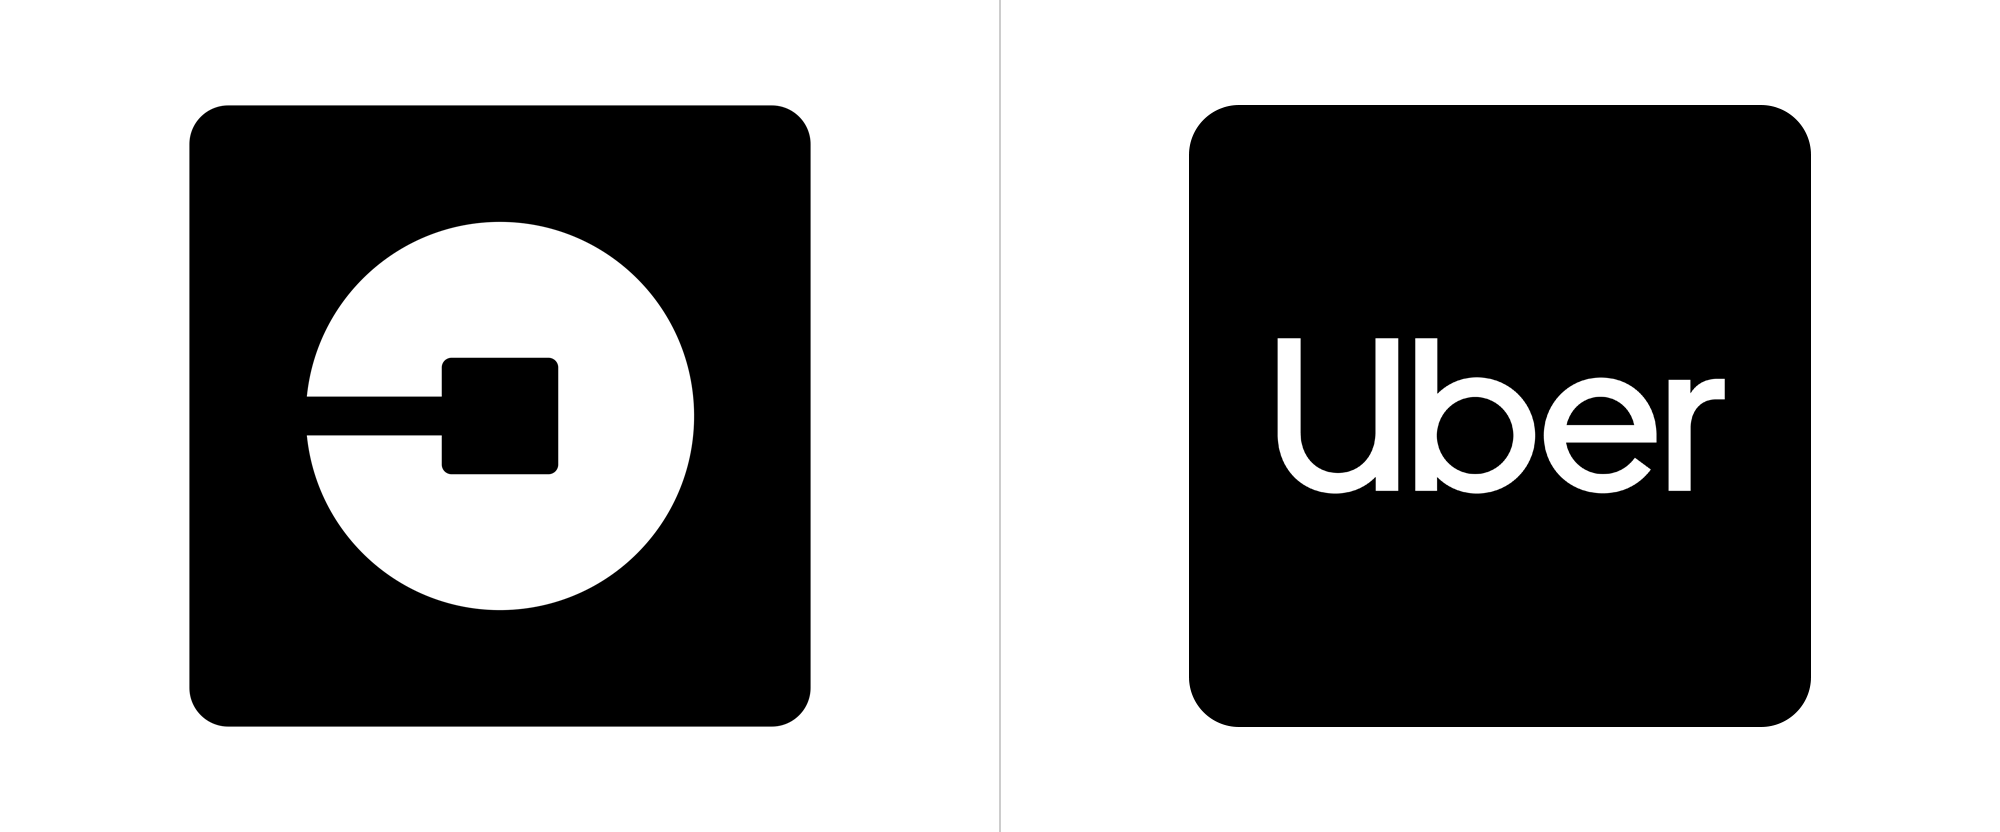 Uber Logo - Brand New: New Logo And Identity For Uber By Wolff Olins And In House